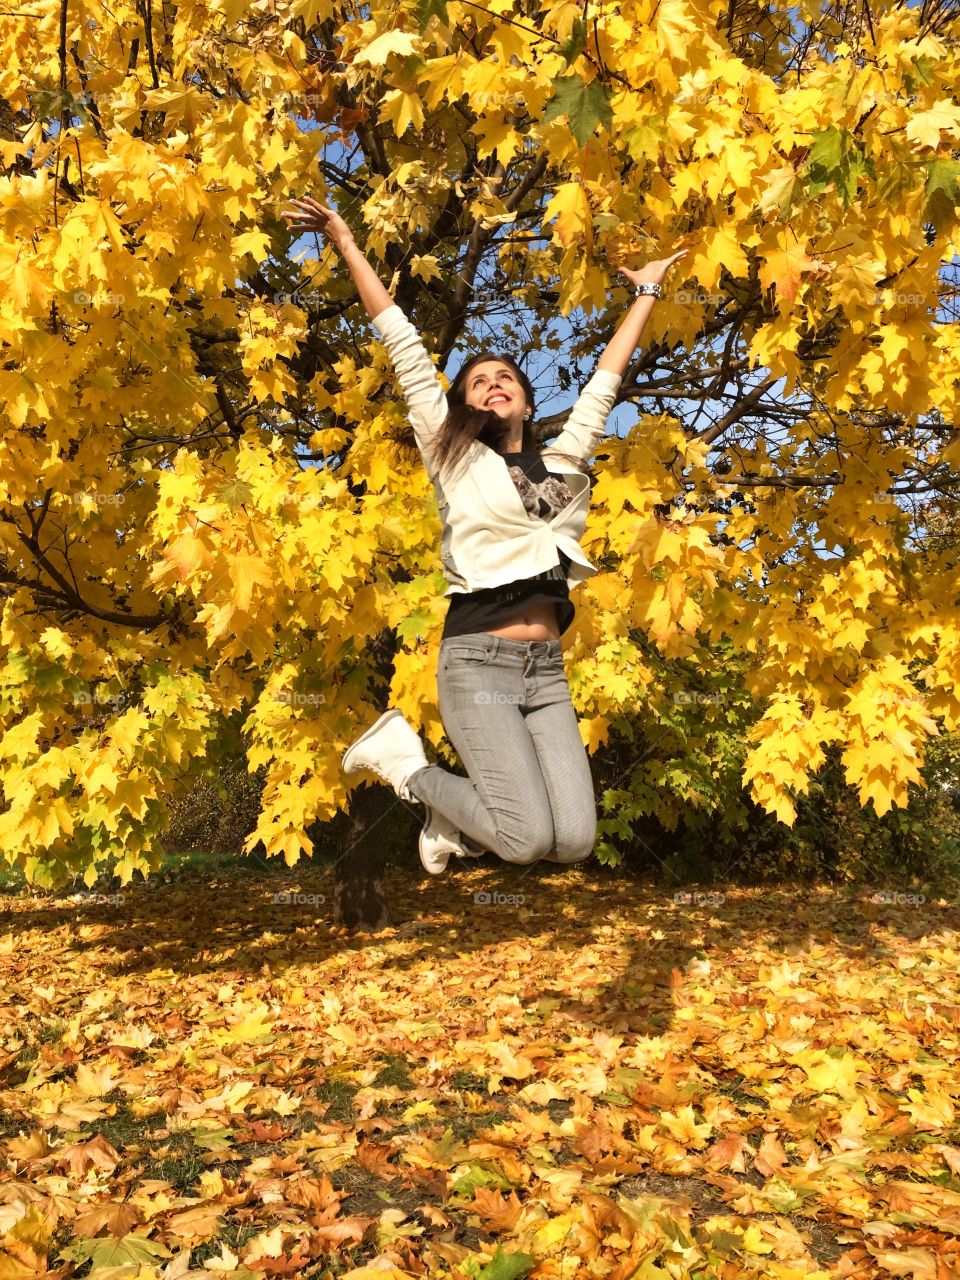 Happy autumn. Smile, shine, be bright. Girl jumping in the golden leaves.